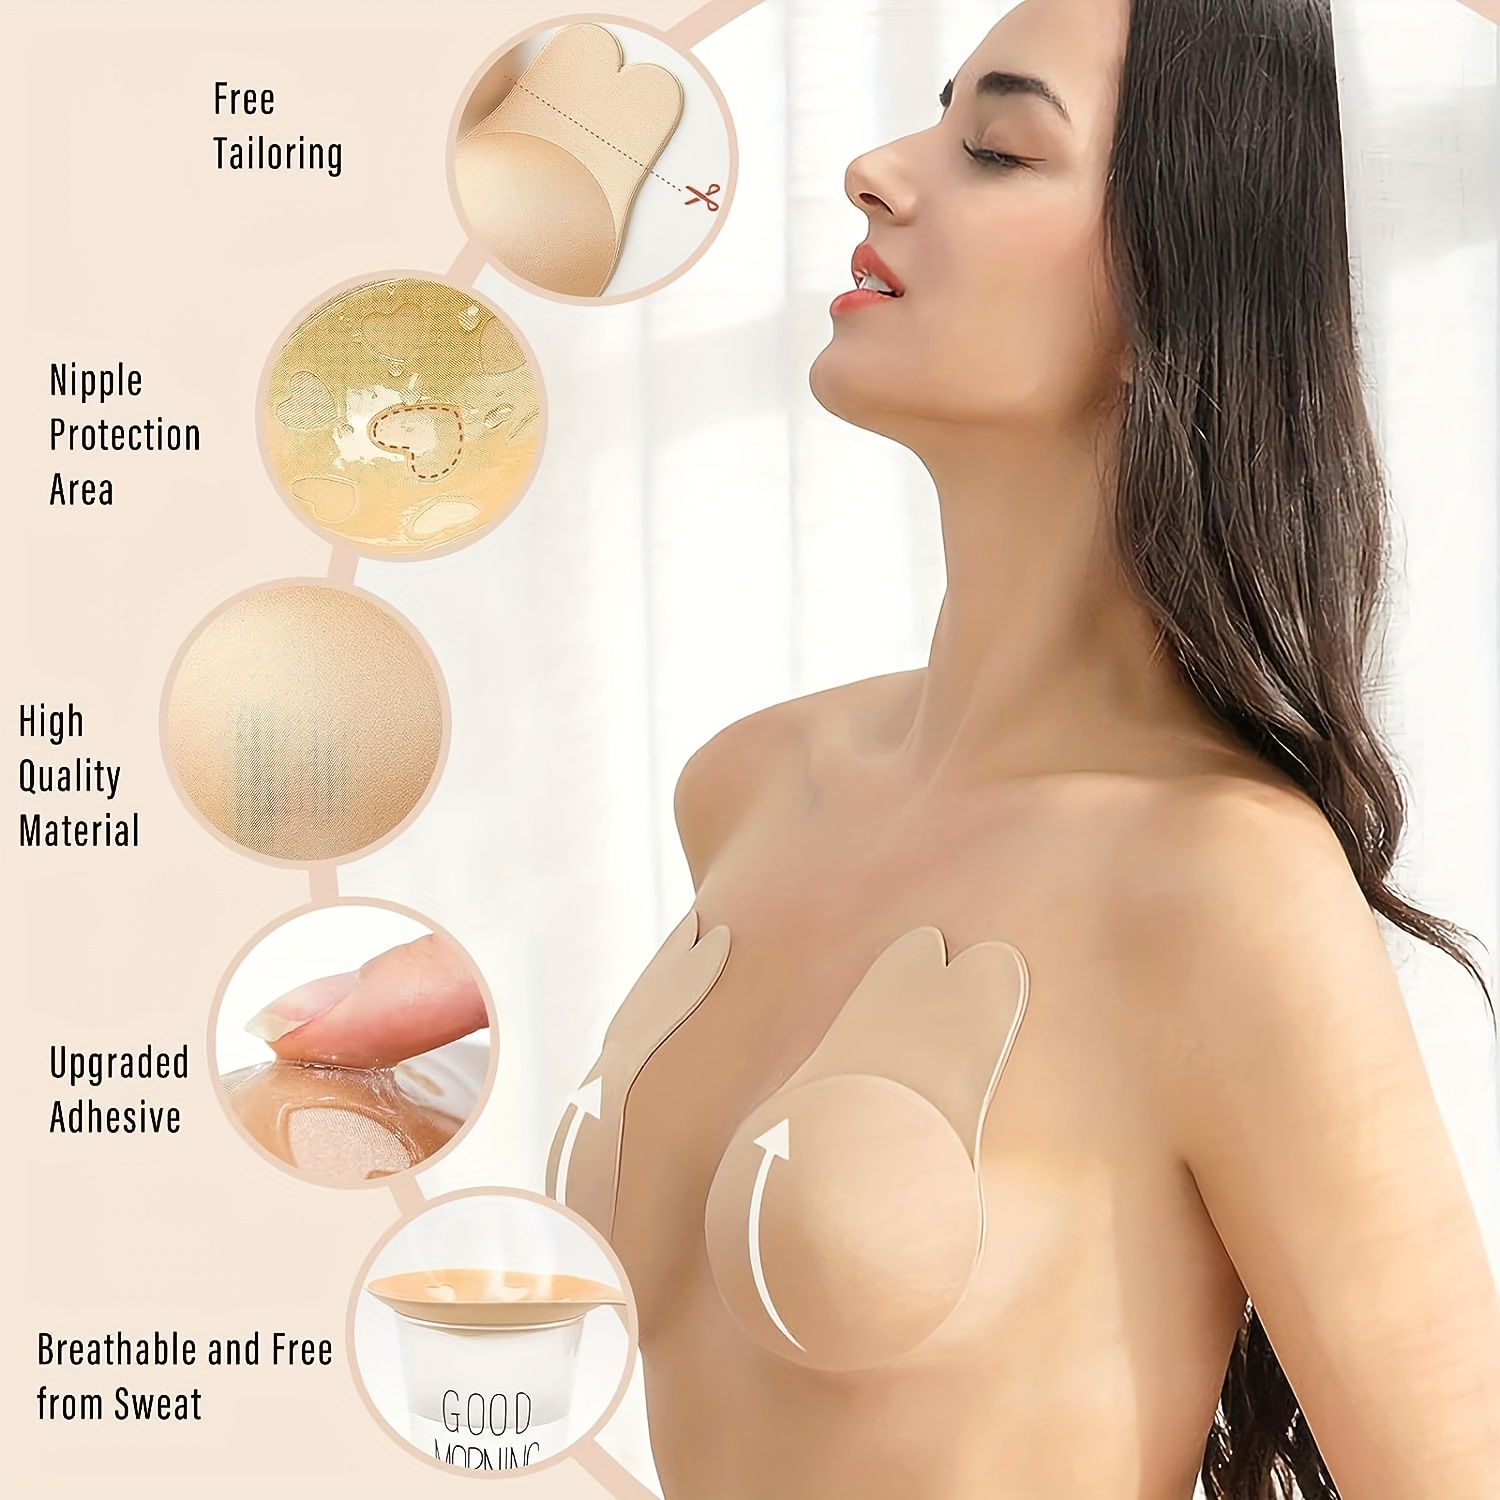 DEPLOZY RABBET NIPAL PAD BEIGE 1P Cotton, Silicone Push Up Bra Pads Price  in India - Buy DEPLOZY RABBET NIPAL PAD BEIGE 1P Cotton, Silicone Push Up  Bra Pads online at